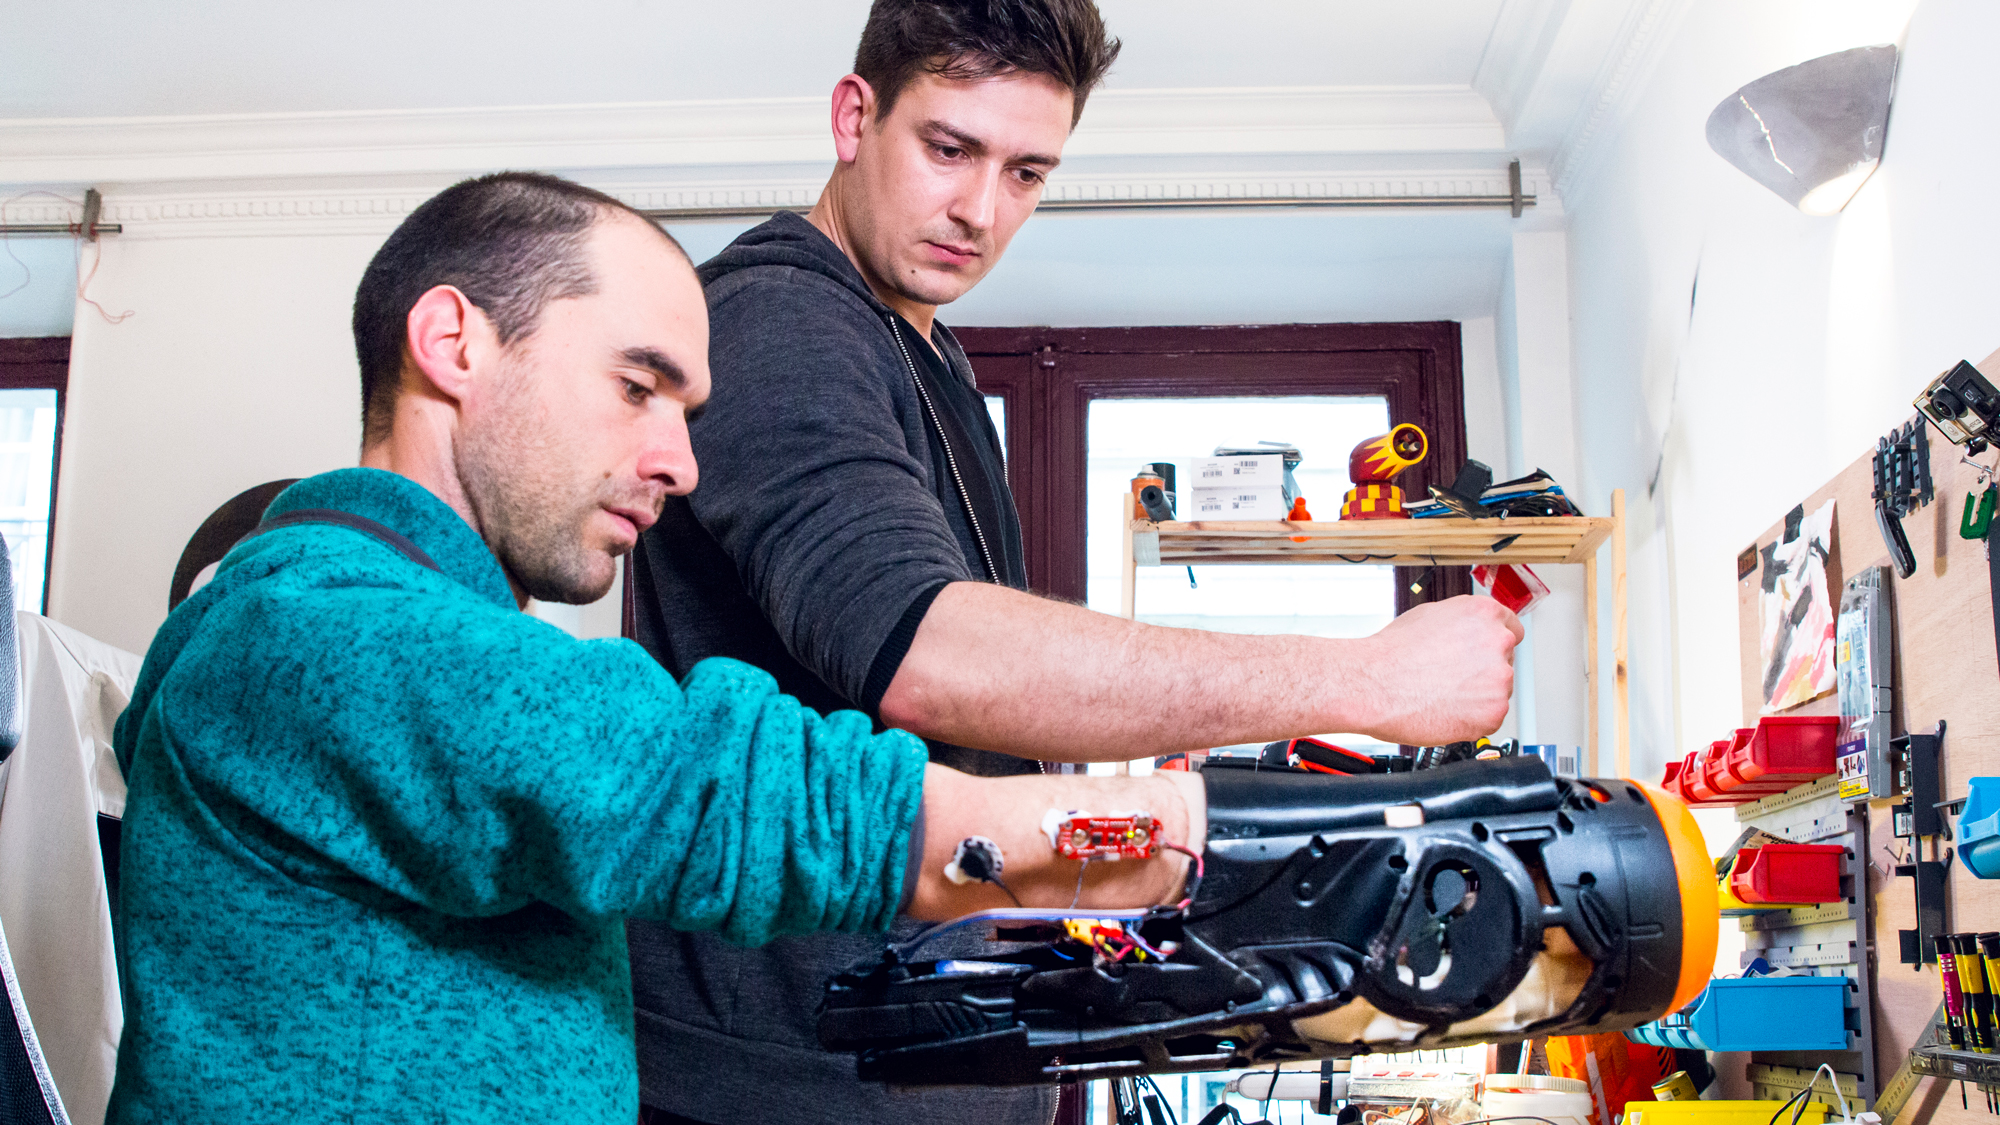 These Hackers Built A Prosthetic Nerf Blaster That Can Be Fired By Flexing Arm Muscles